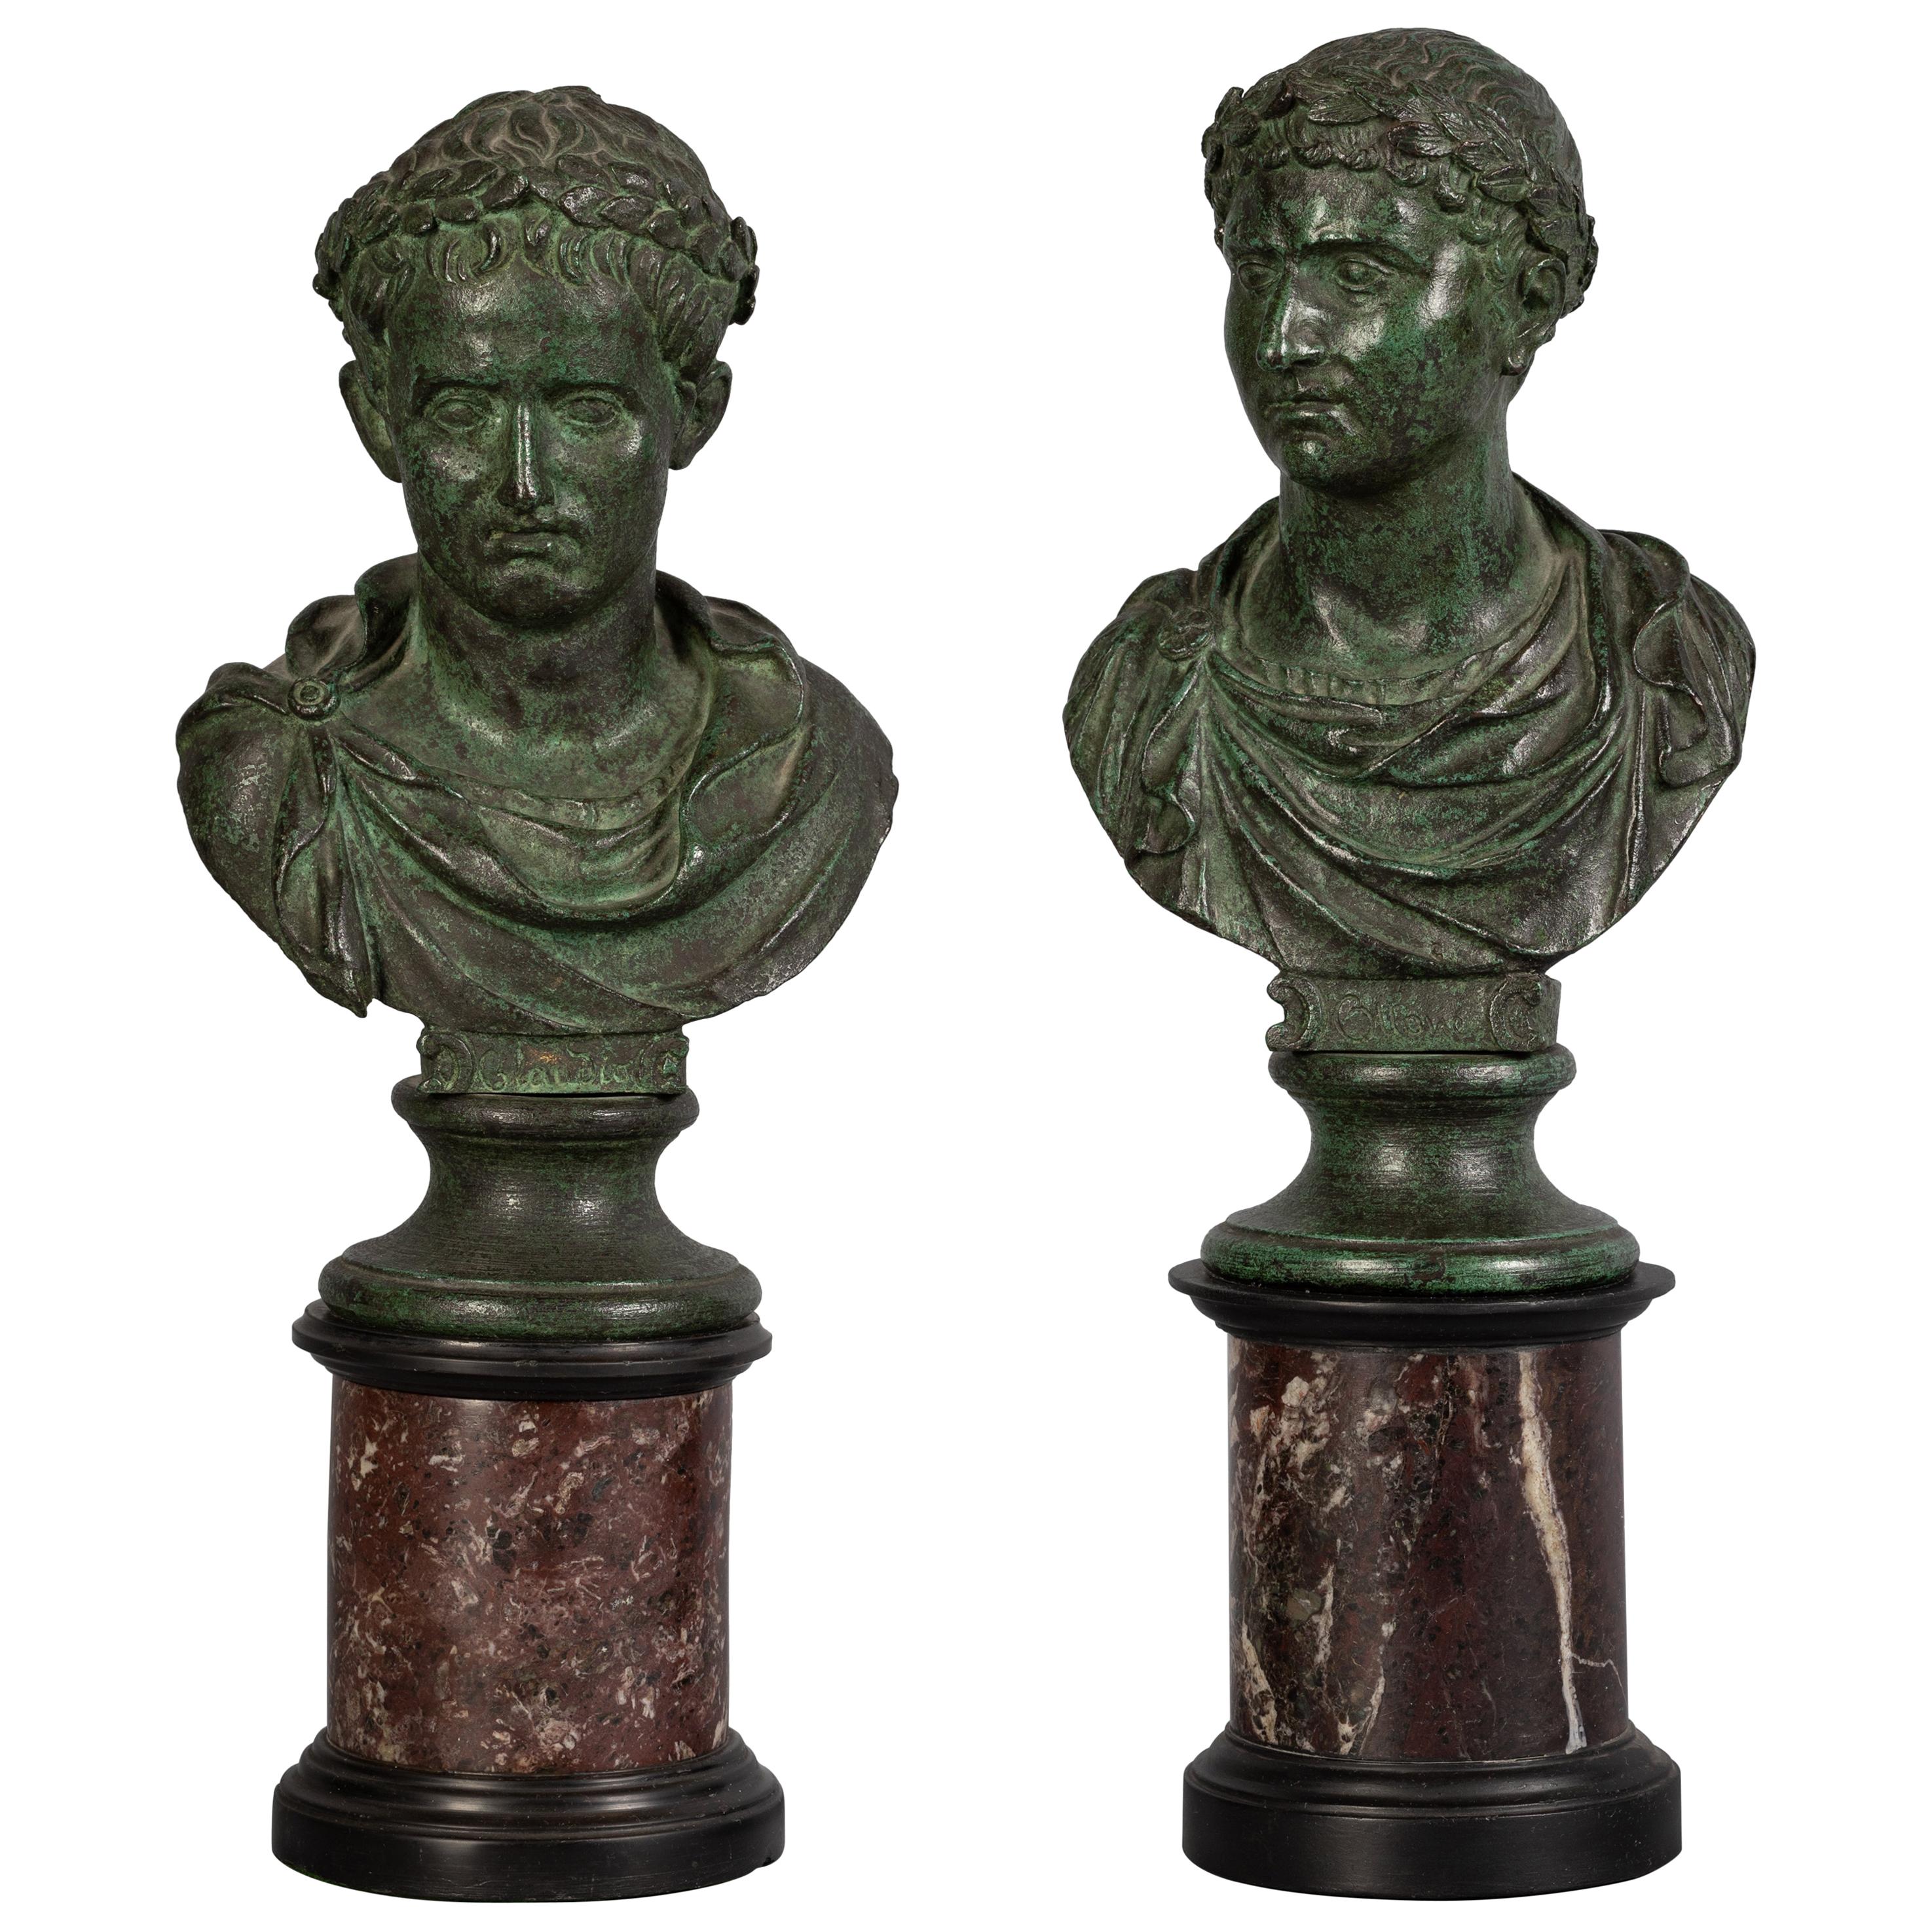 Pair of Patinated Bronze Busts on Marble Stands, circa 1800